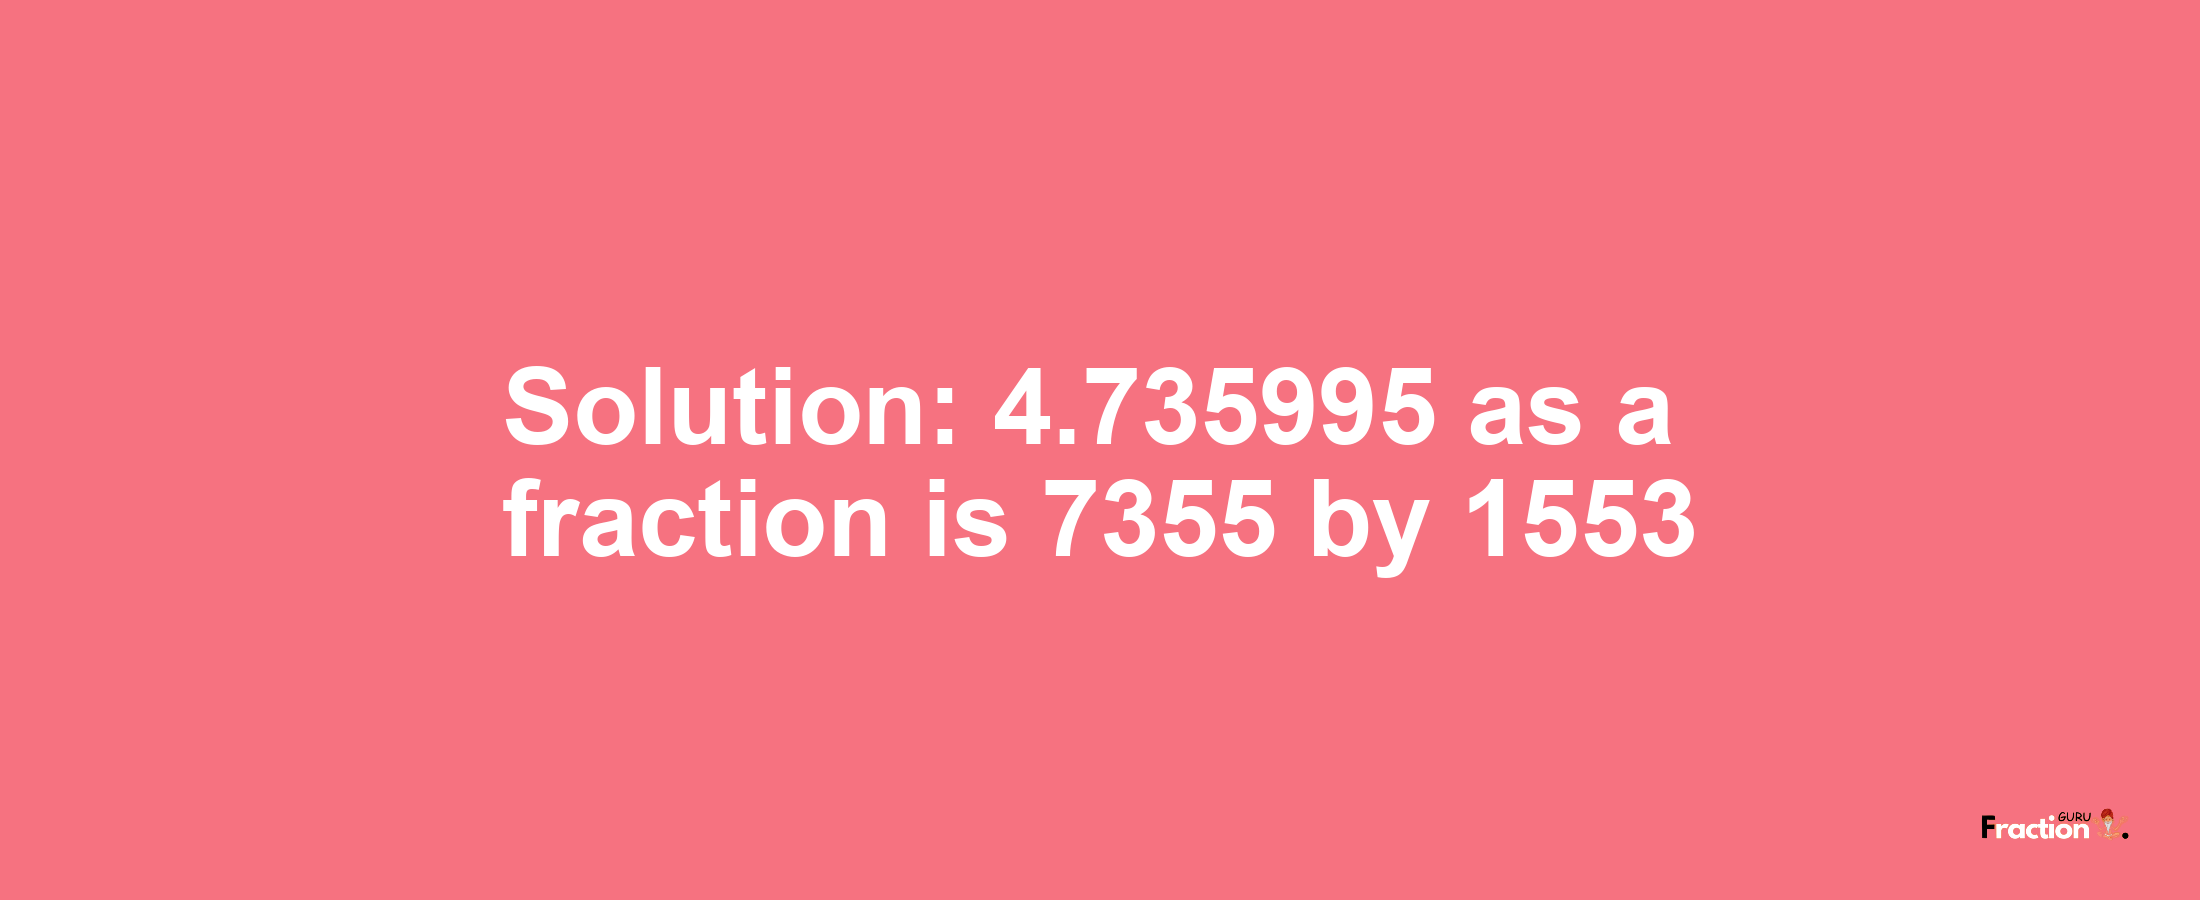 Solution:4.735995 as a fraction is 7355/1553